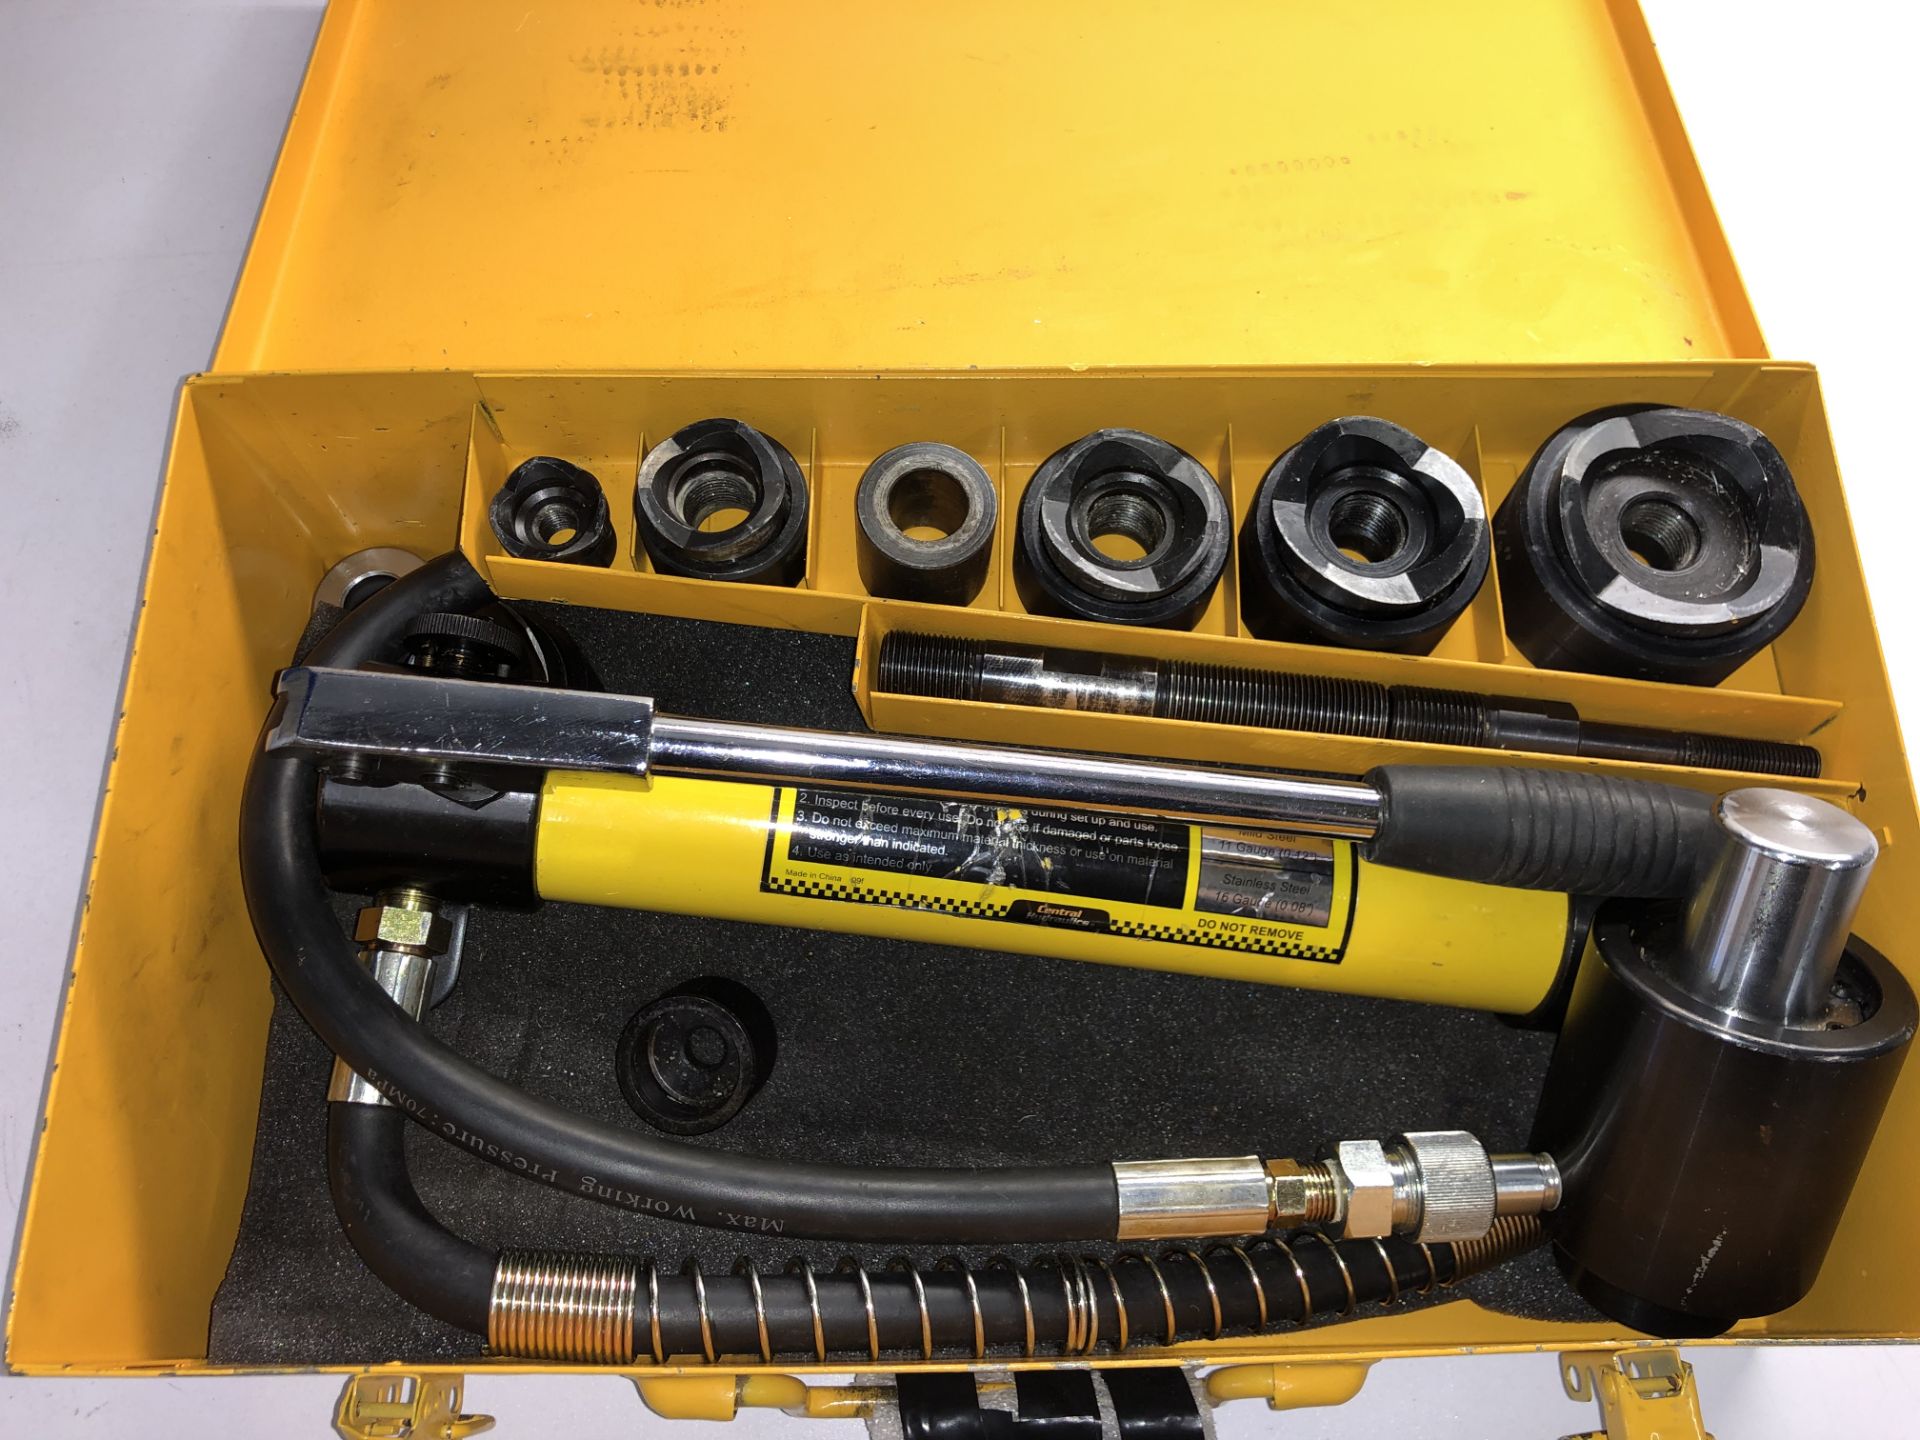 CENTRAL HYDRAULICS HYDRAULIC PUNCH DRIVER KIT ( CUTTING CAPACITY MILD STEEL 11 GAUGE ( 0.12"") - Image 9 of 11